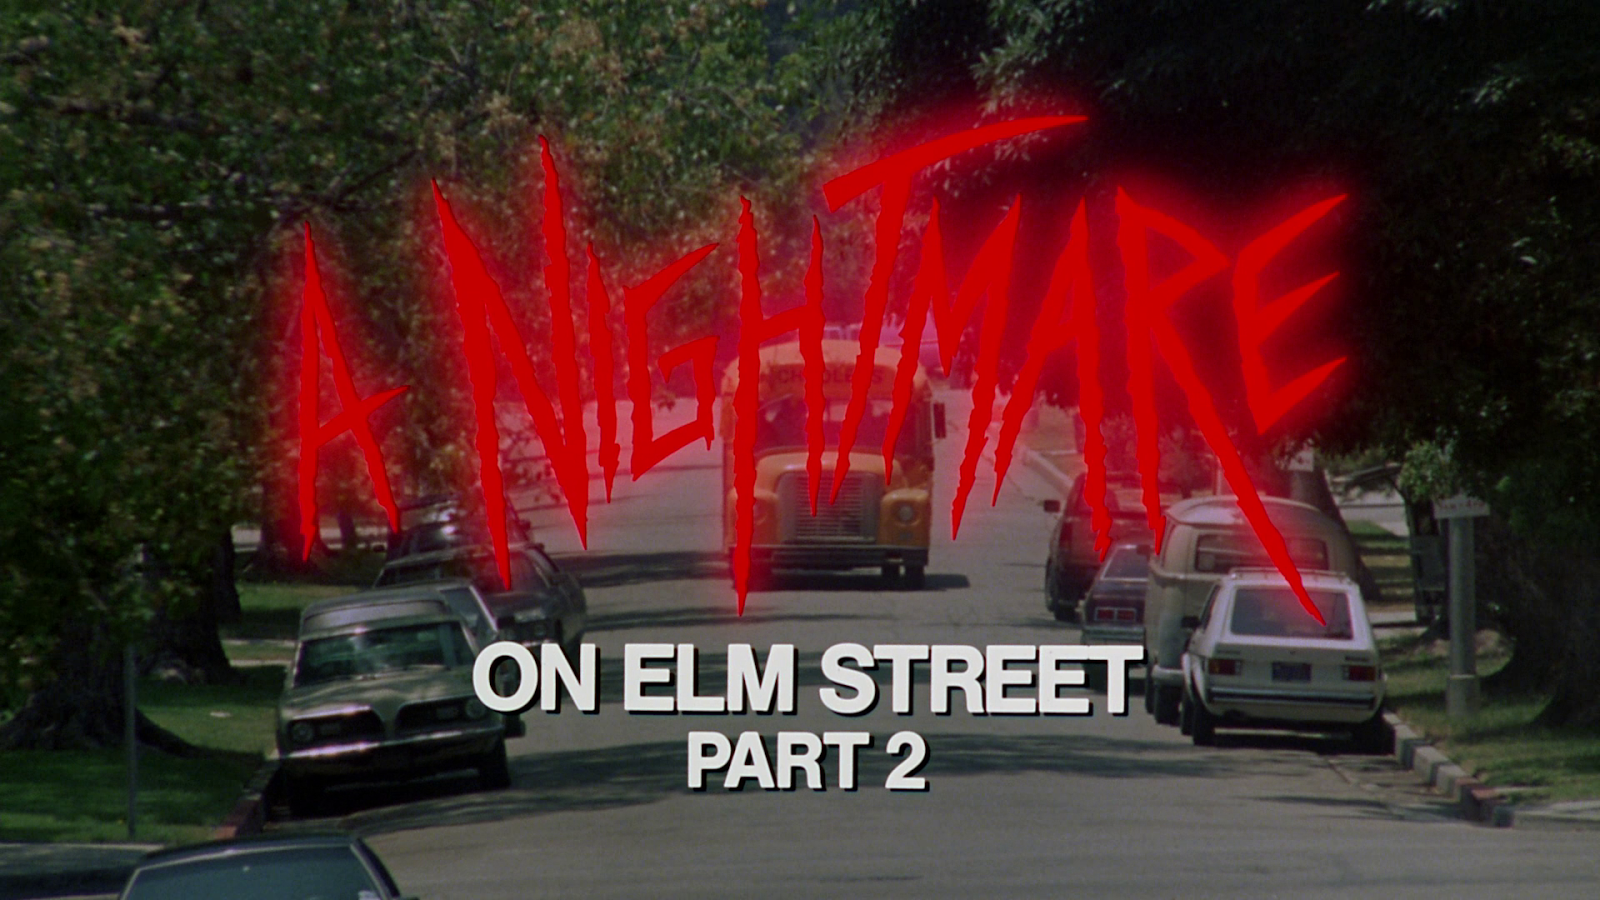 The title screen in Jack Sholder's A Nightmare on Elm Street 2.